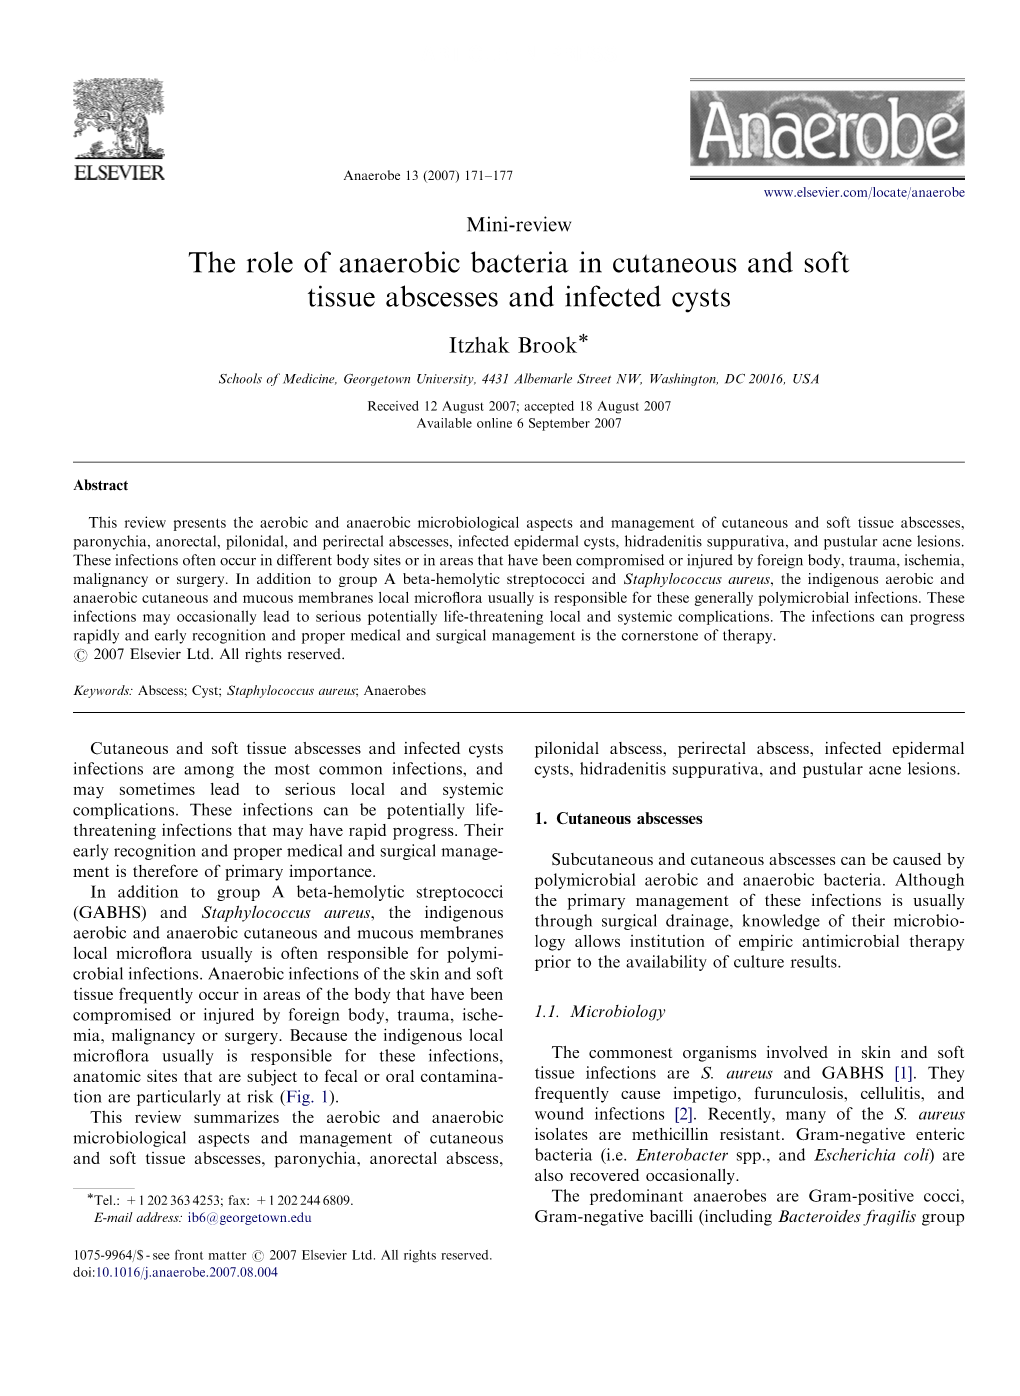 The Role of Anaerobic Bacteria in Cutaneous and Soft Tissue Abscesses and Infected Cysts